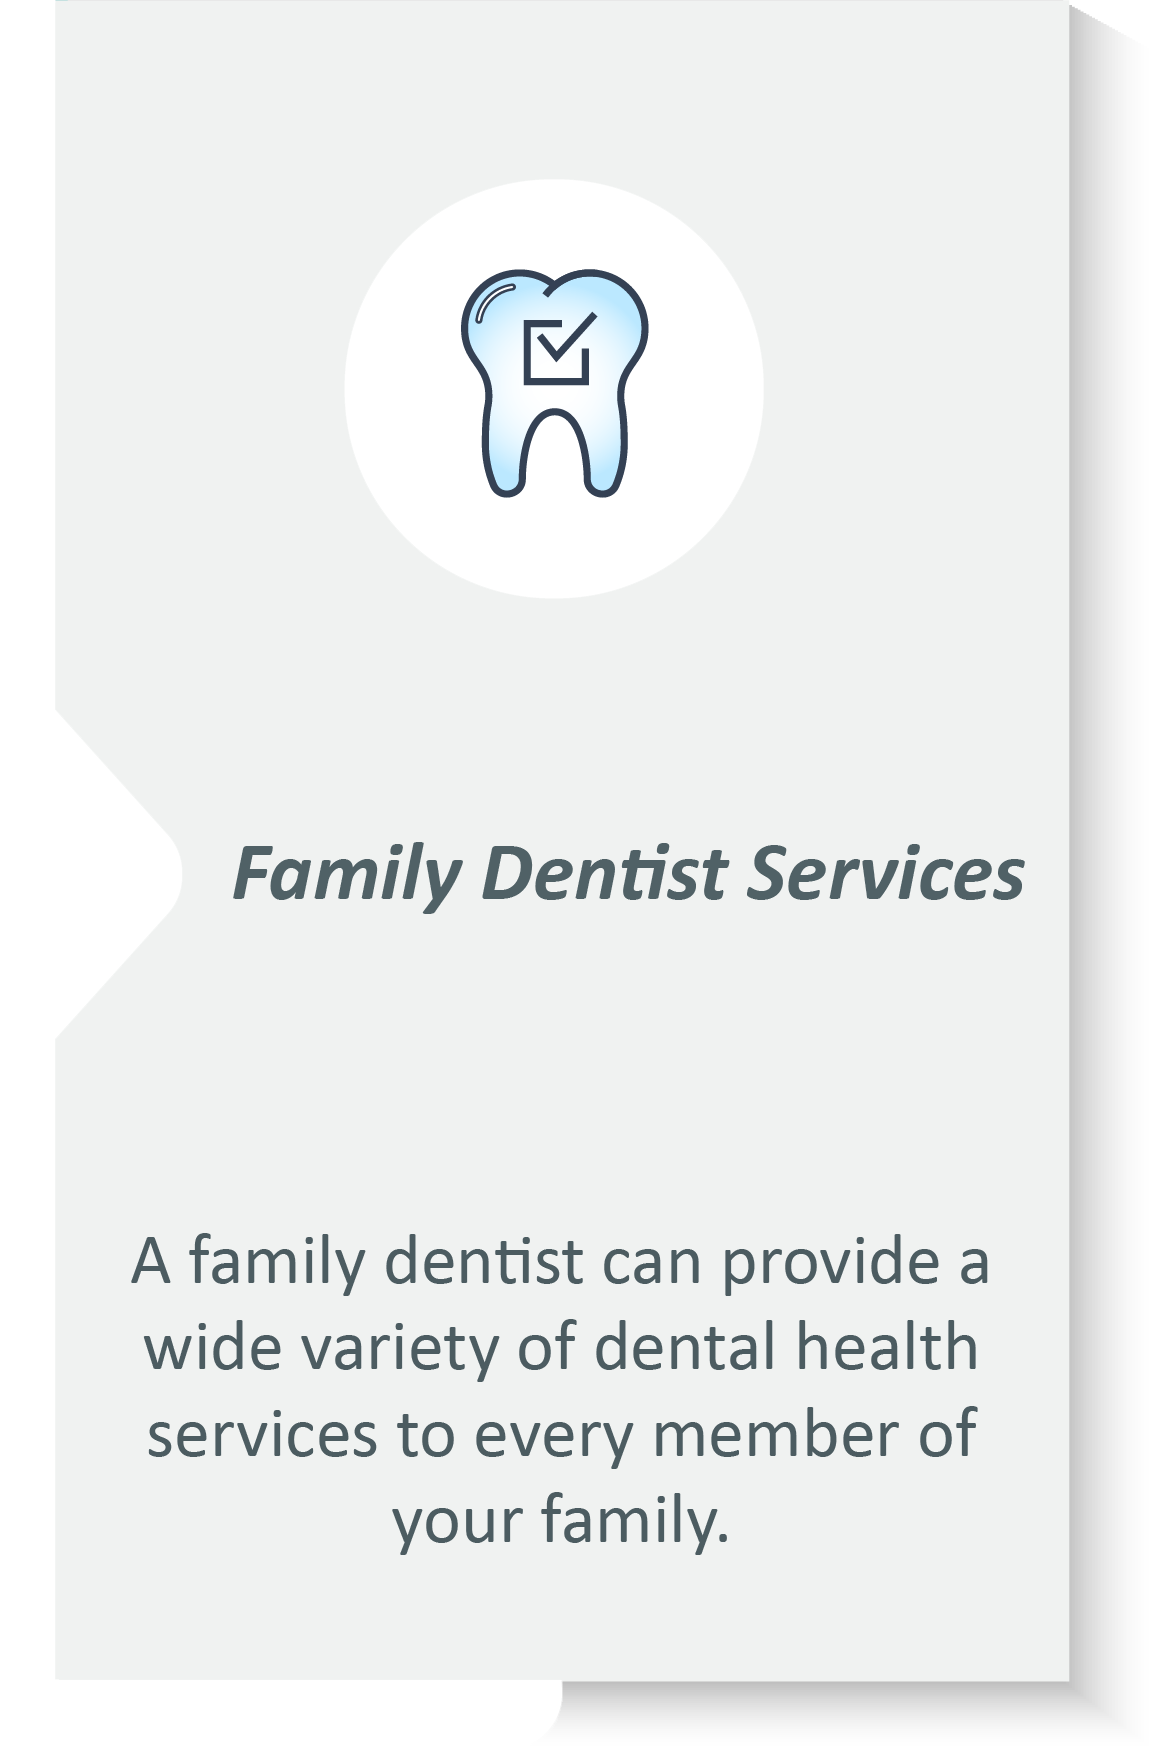 Family dentist infographic: A family dentist can provide a wide variety of dental health services to every member of your family.